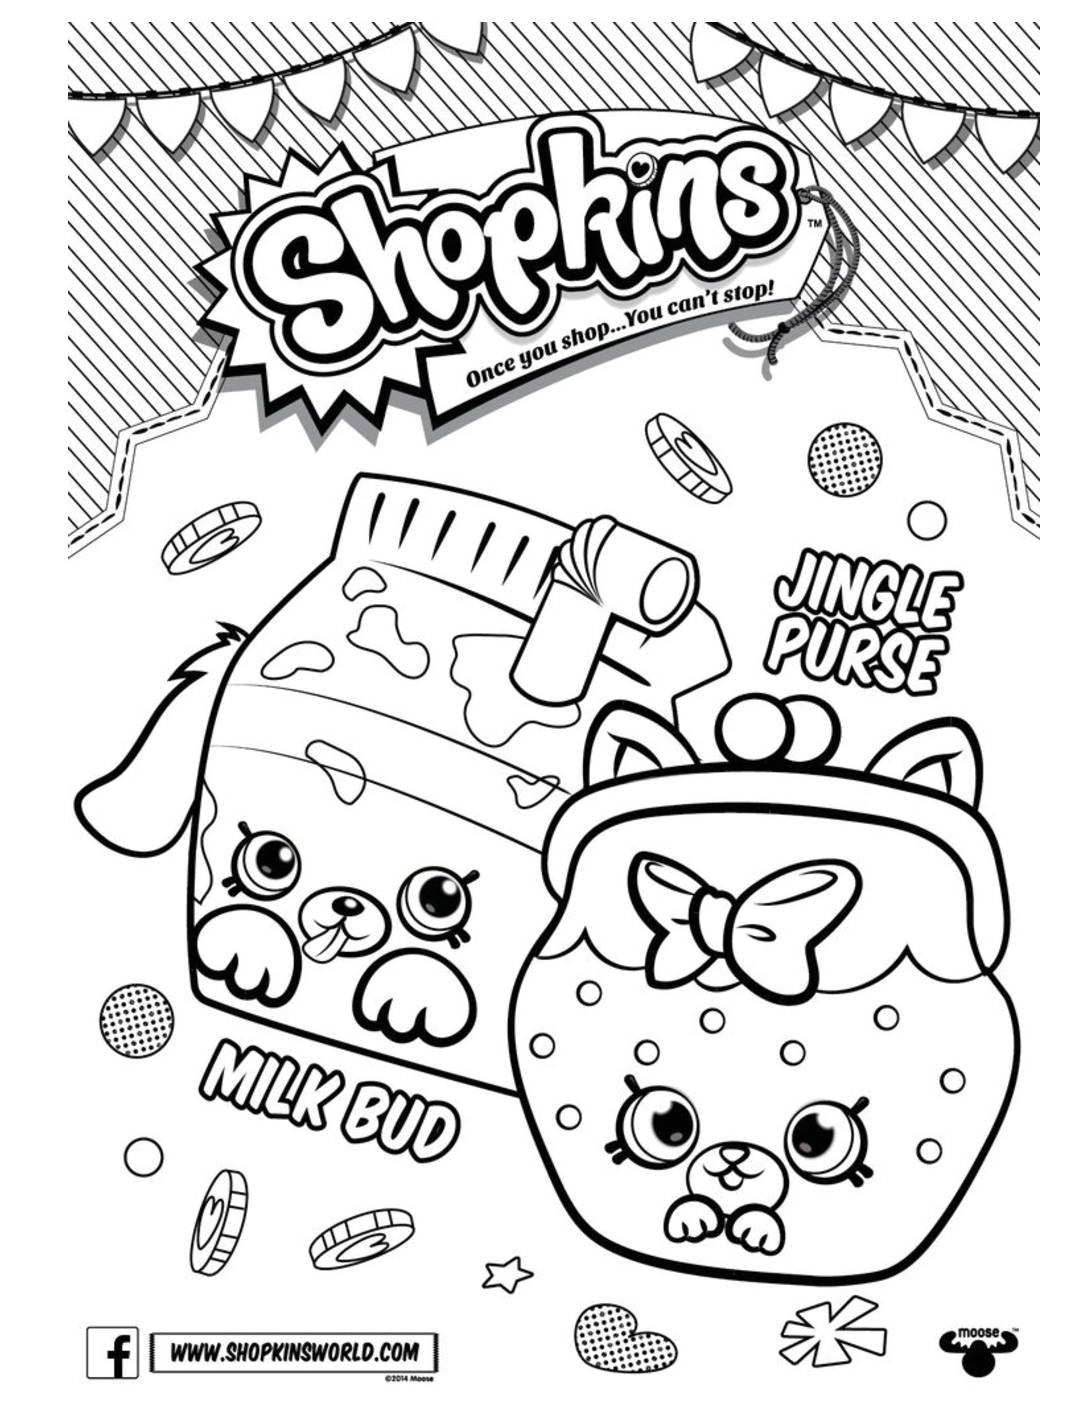 Shopkins Coloring Page 5 Coloring Pages